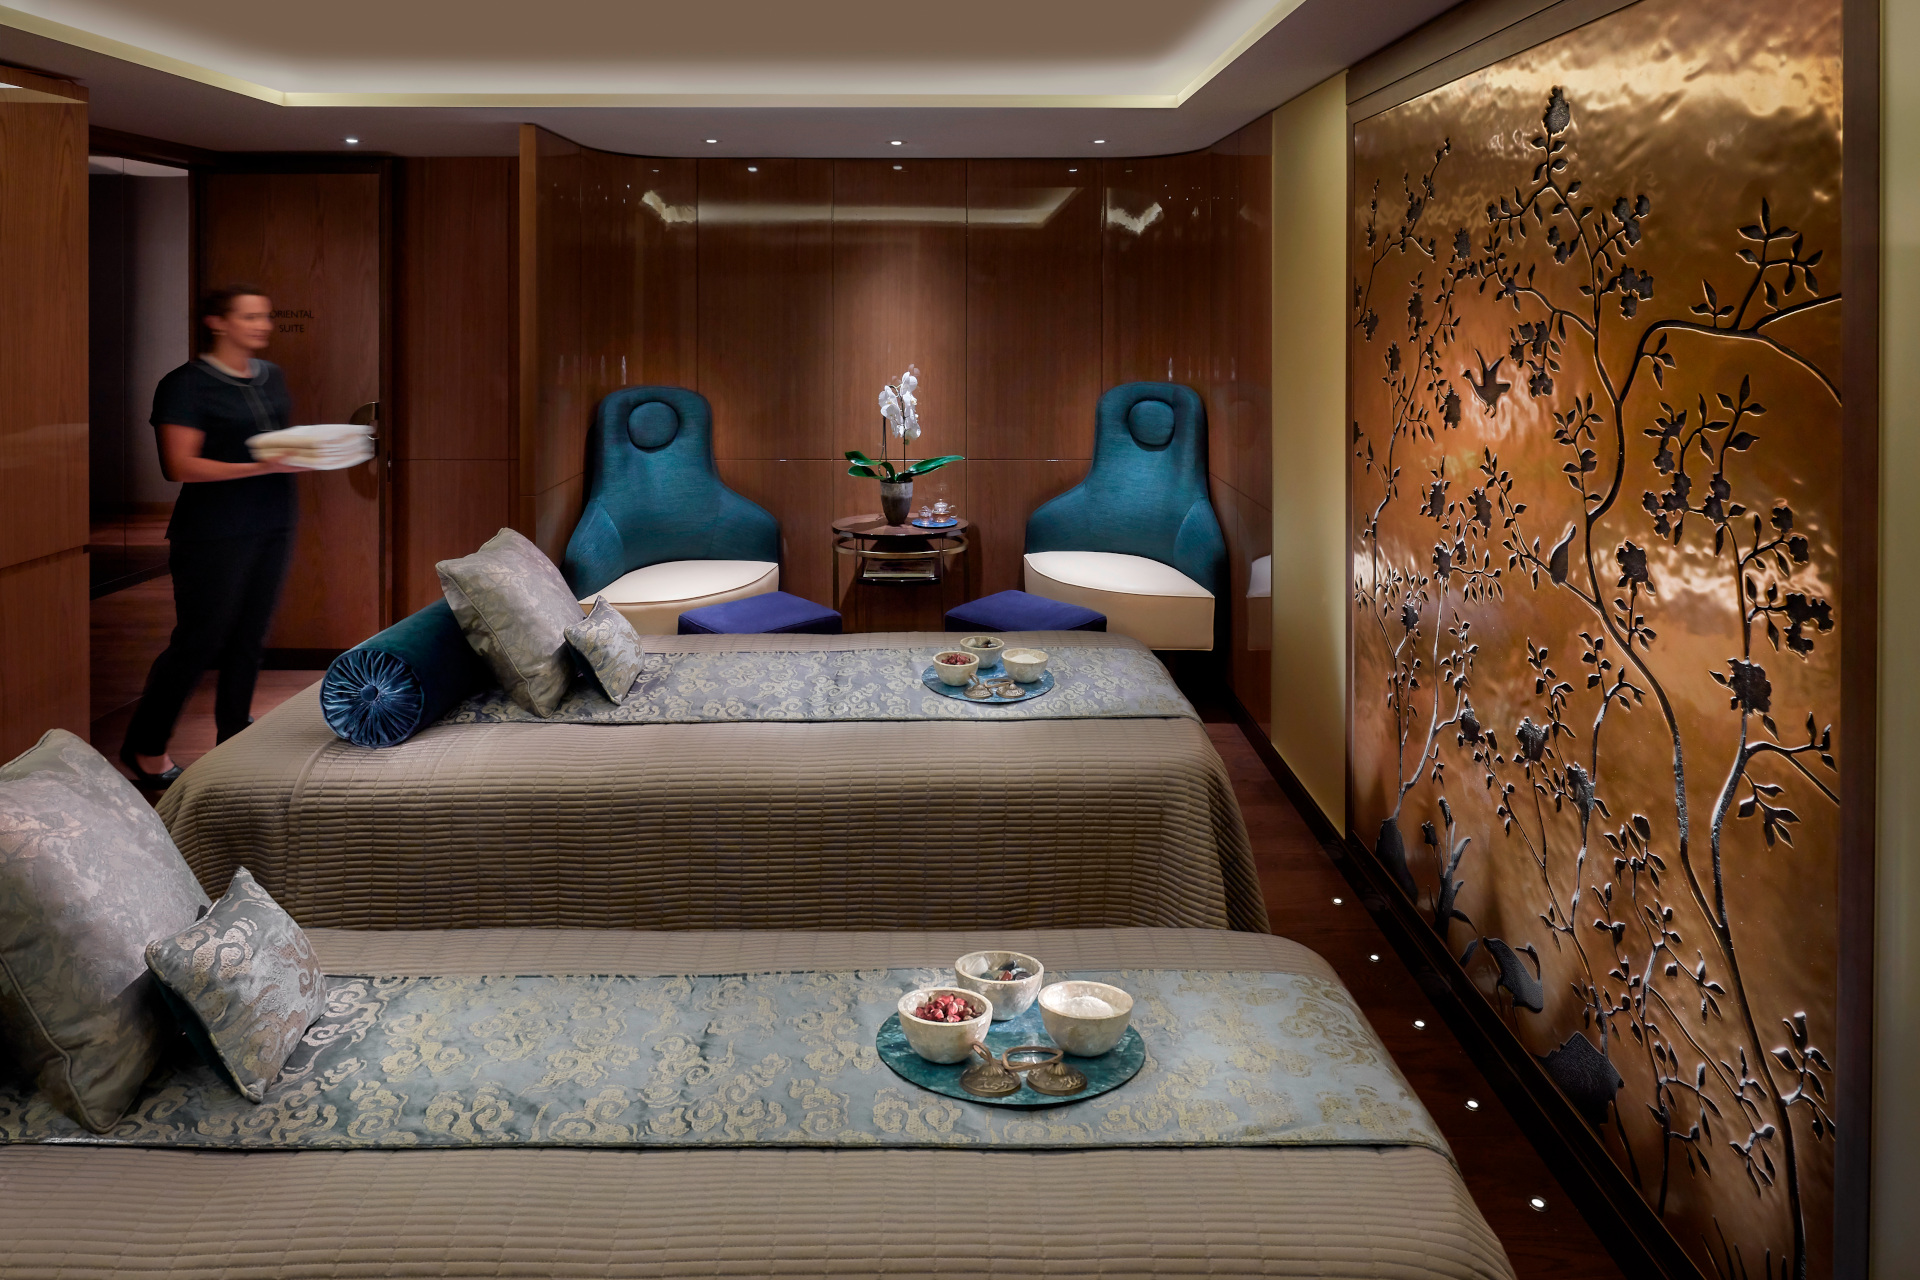 Spa treatment room with two beds, blue chairs and gold walls, with attendant walking in with towels